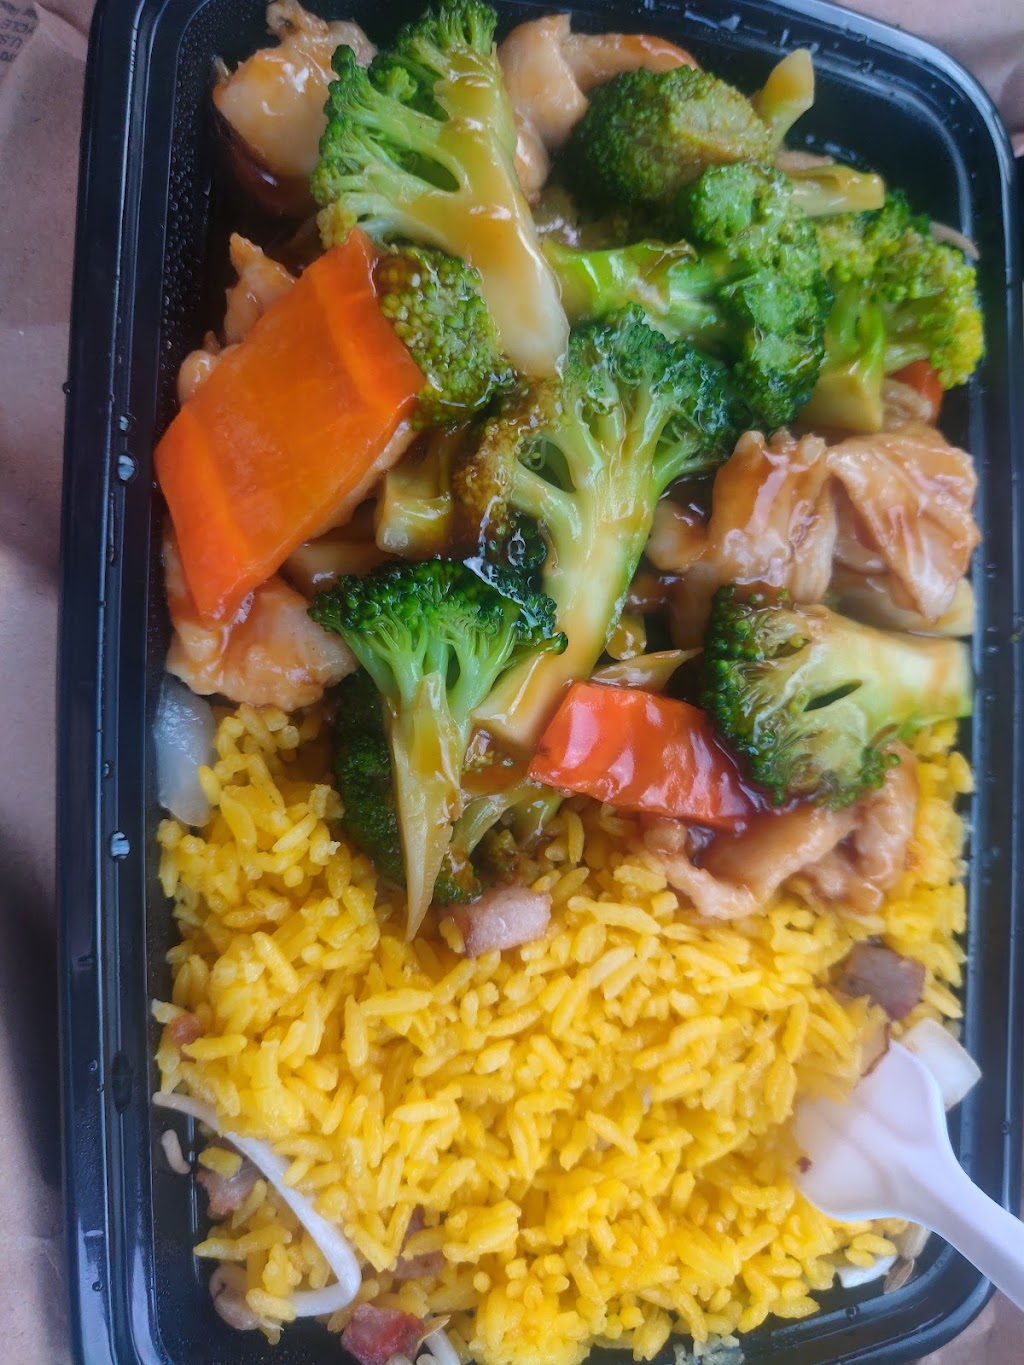 Great Wall II Take Out Chinese | 60 Charles Colman Blvd, Pawling, NY 12564 | Phone: (845) 855-9750